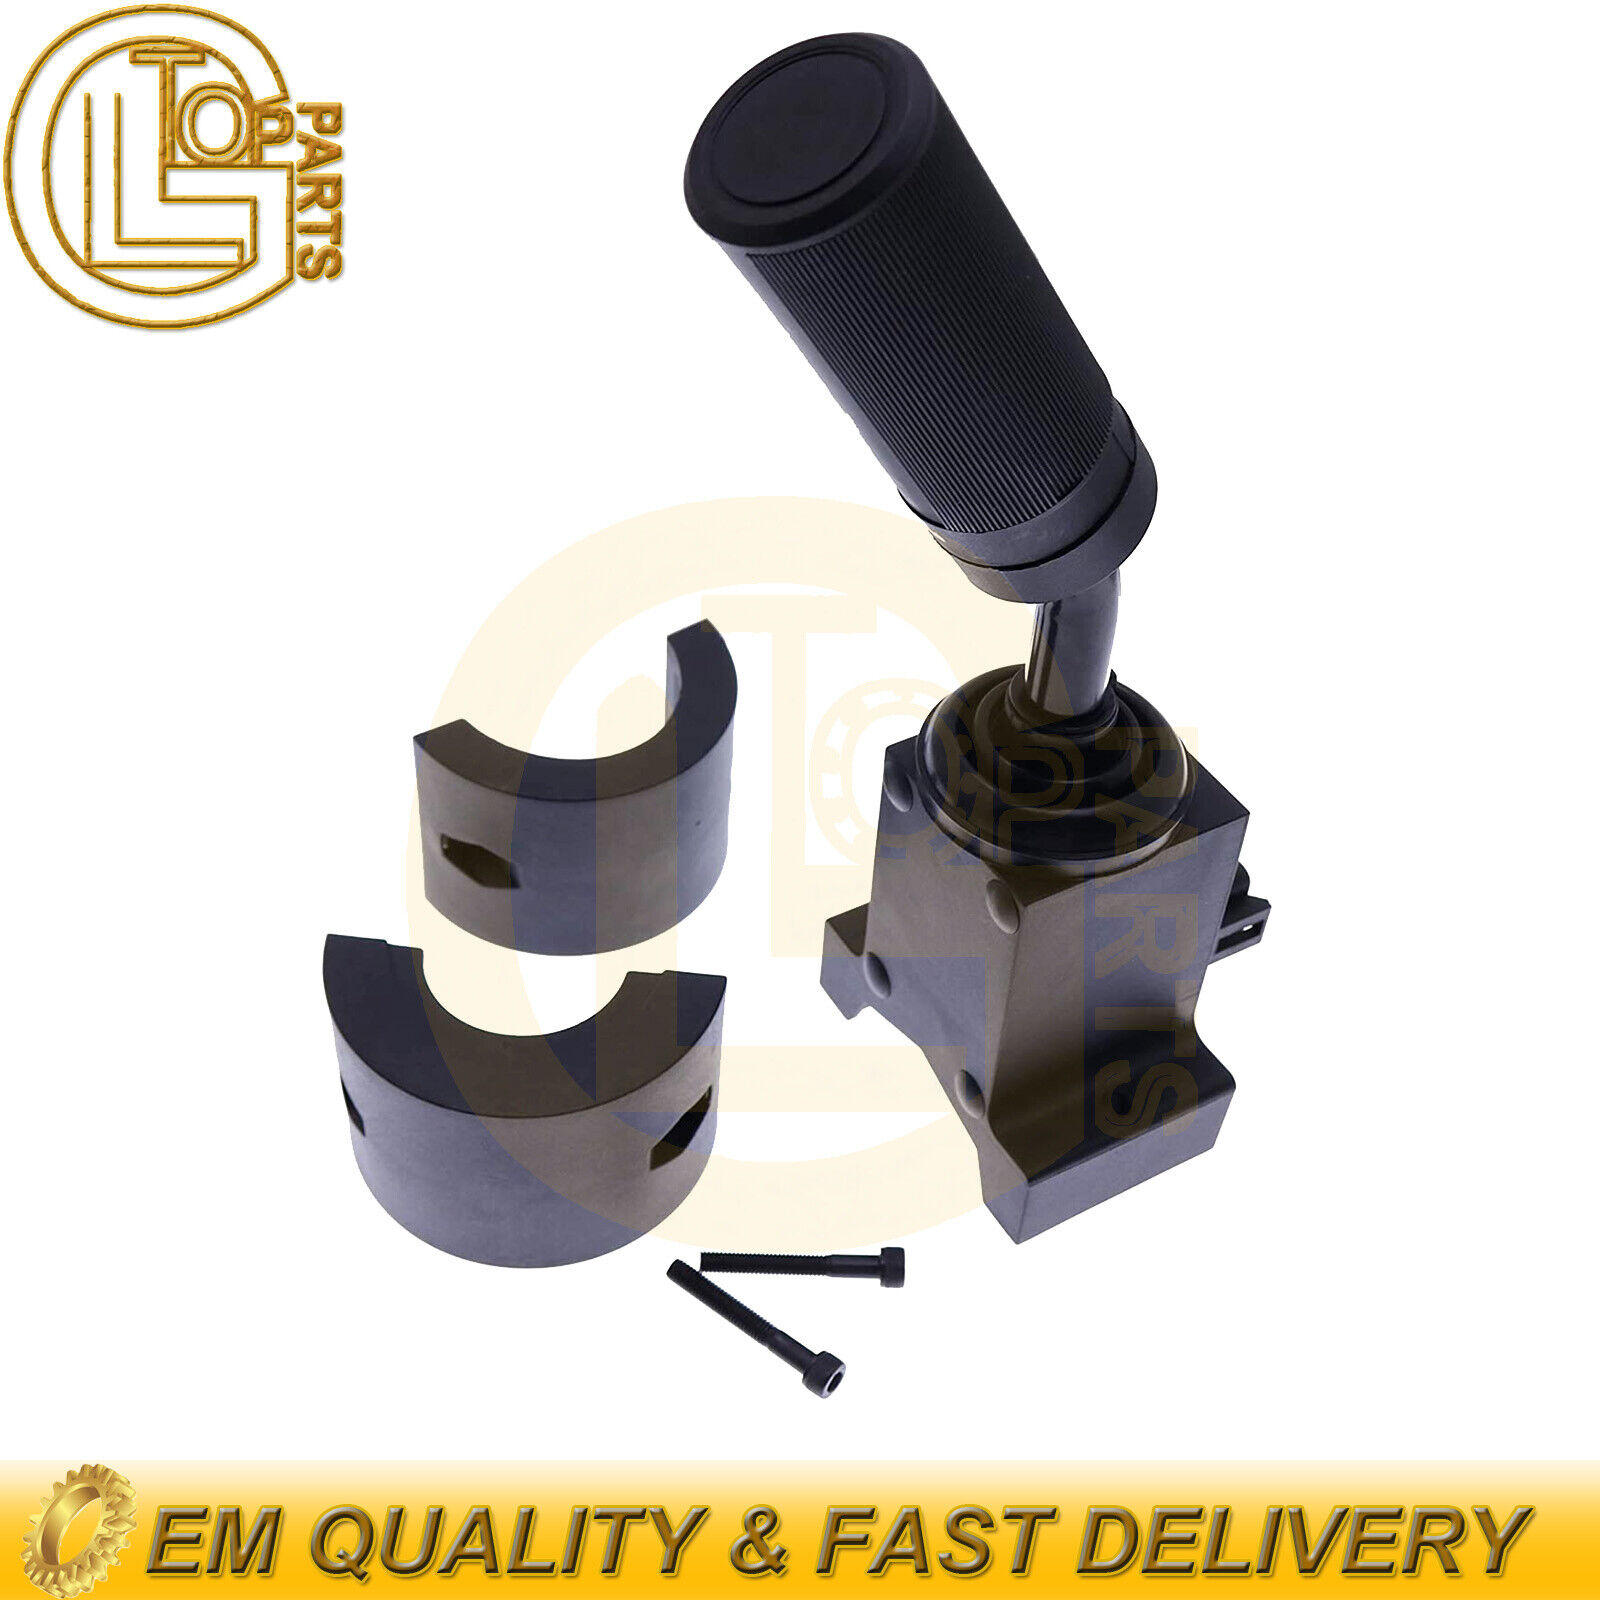 For Gehl Telehandler RS6-34 RS6-42 RS6-44 RS8-42 RS8-44 Transmission Shifter